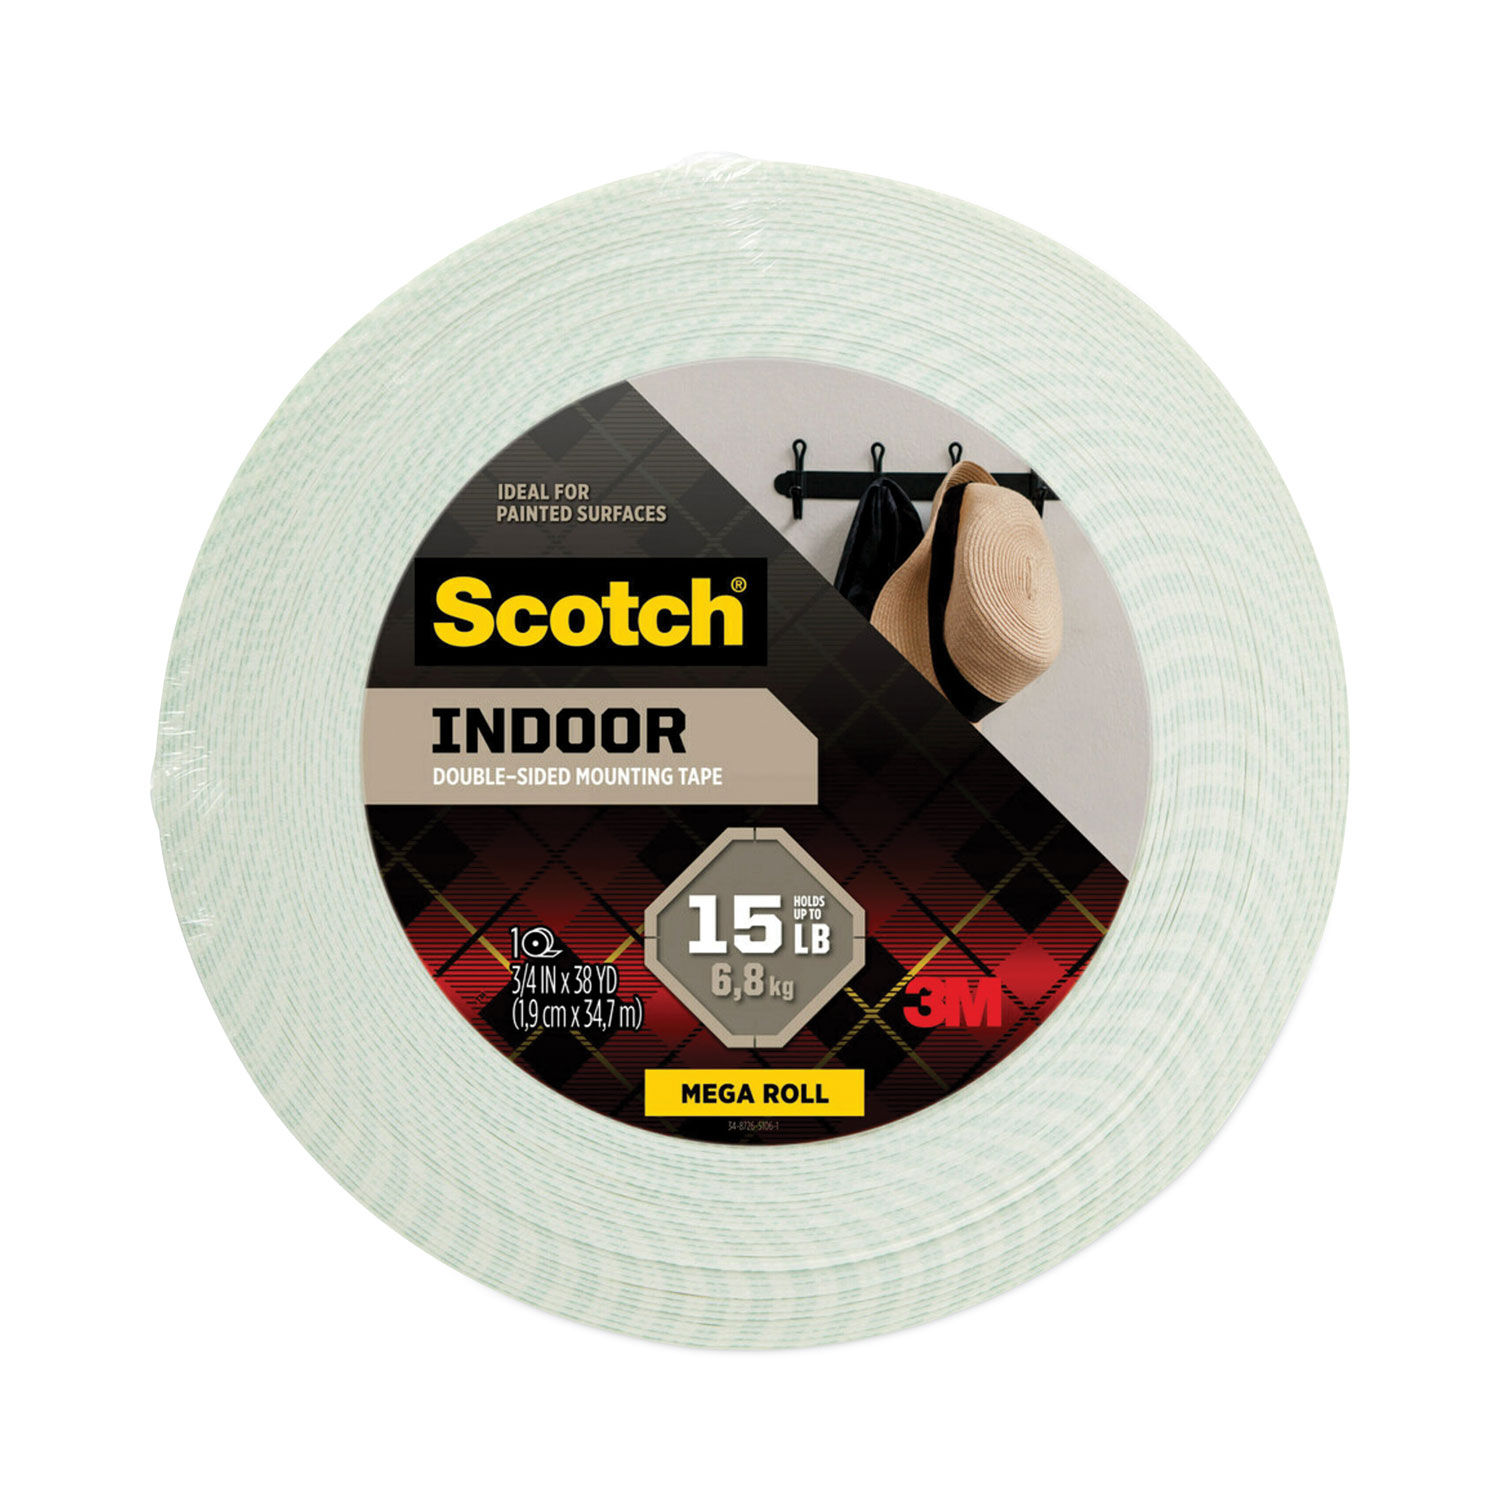 3M Scotch Double Sided Office Tape, Permanent, 0.5 x 250 - 3 pack